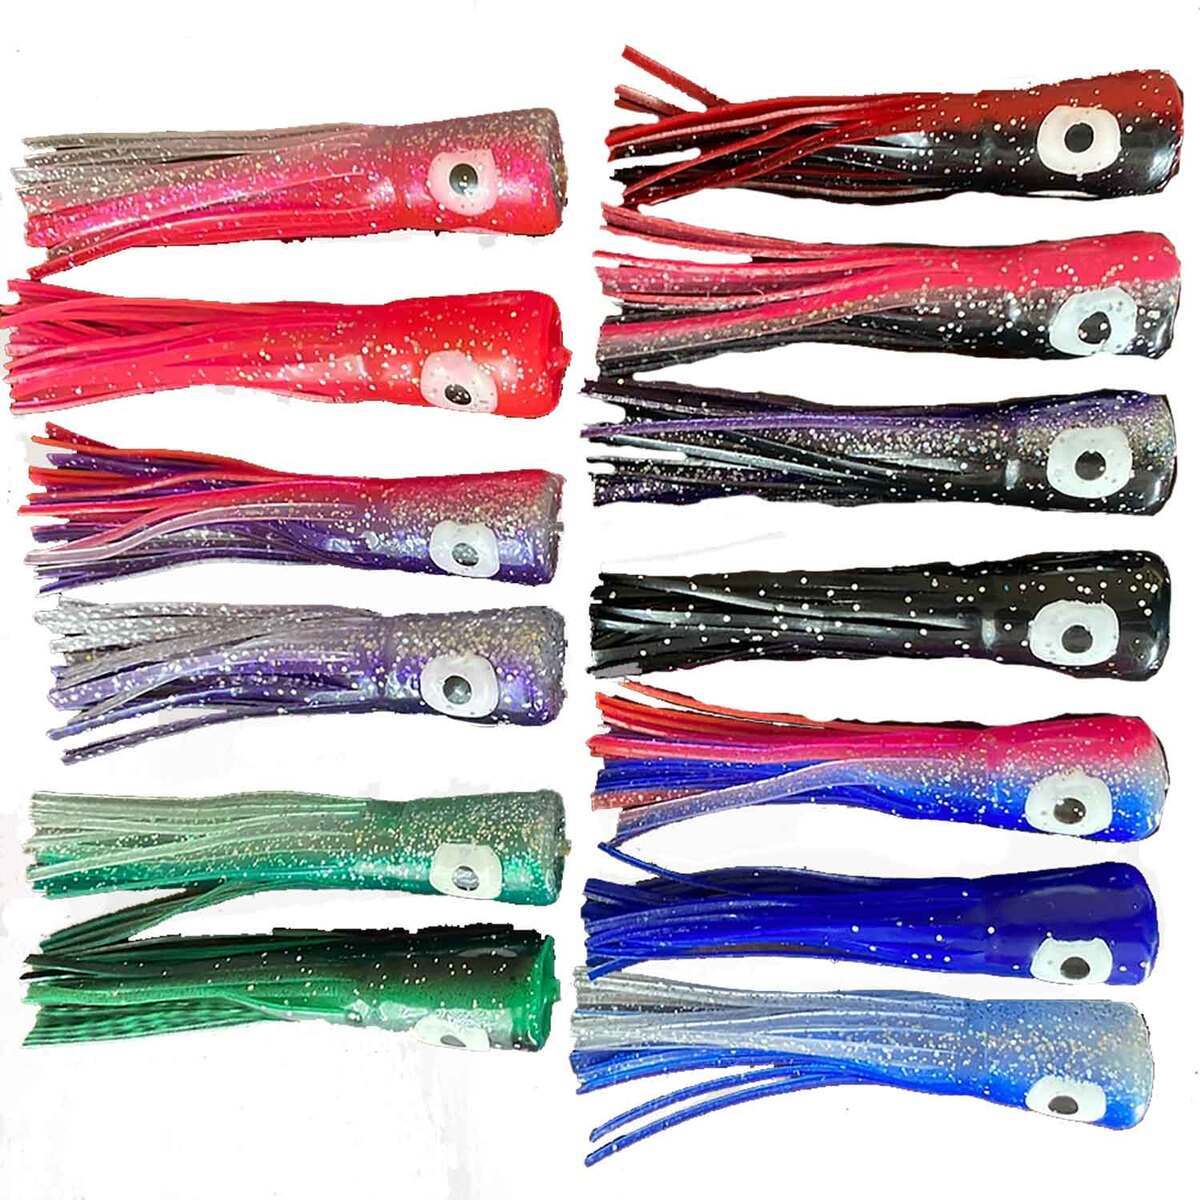 MagBay Lures Chugger Medium Saltwater Trolling Lure - Purple Silver by Sportsman's Warehouse